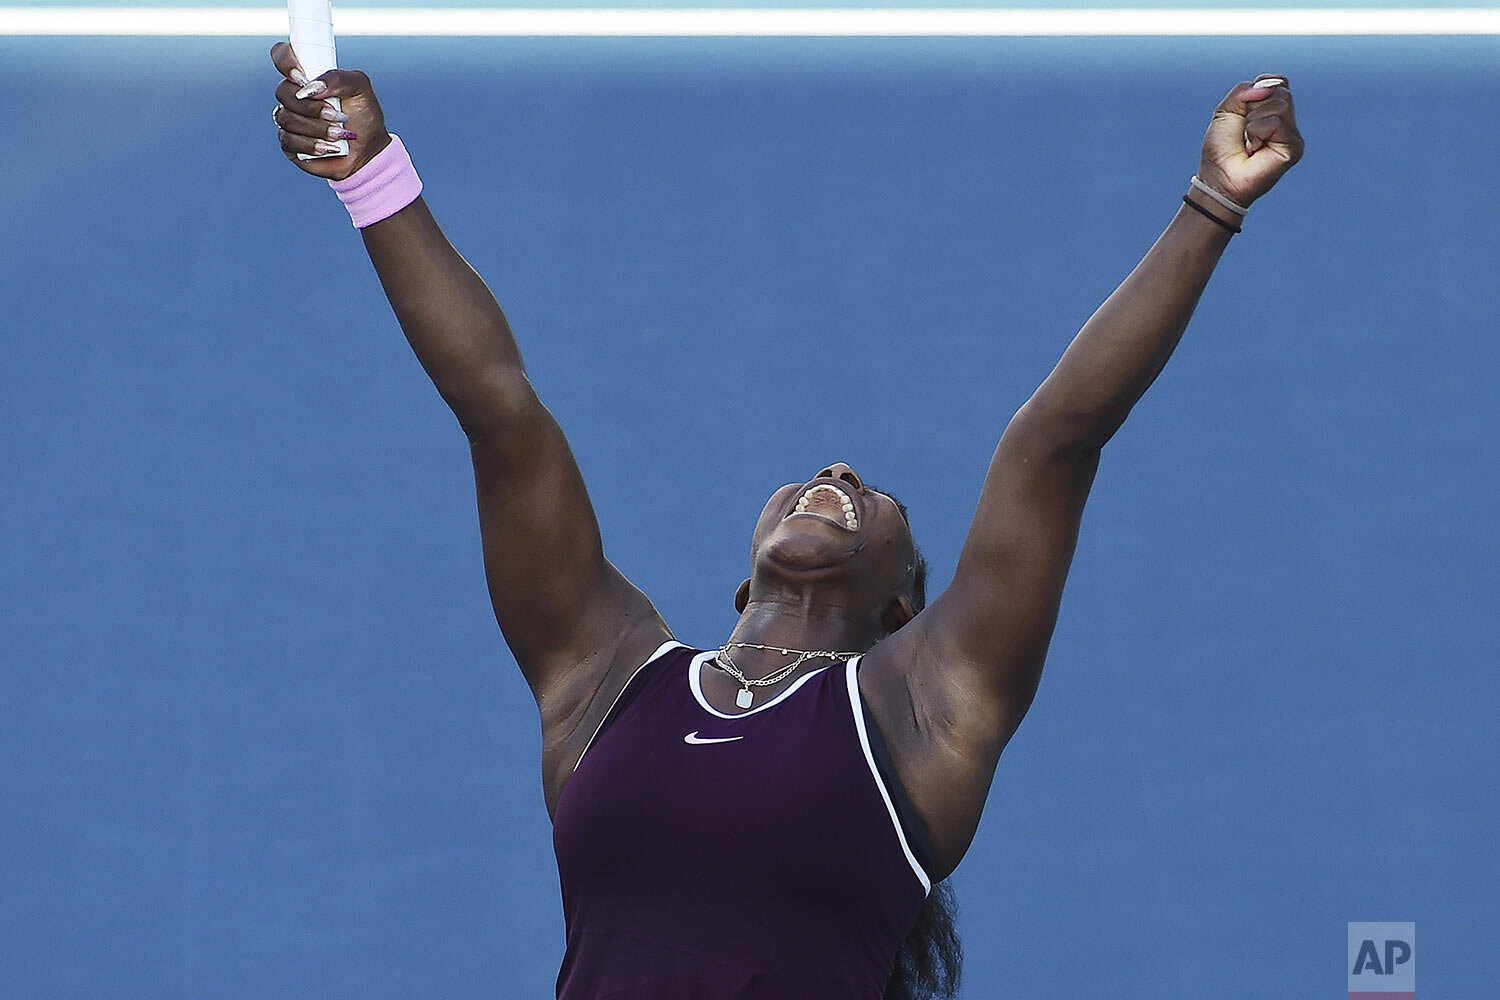  United States Serena Williams celebrates winning her finals singles match against United States Jessica Pegula at the ASB Classic in Auckland, New Zealand, Sunday, Jan 12, 2020. (Chris Symes/Photosport via AP) 